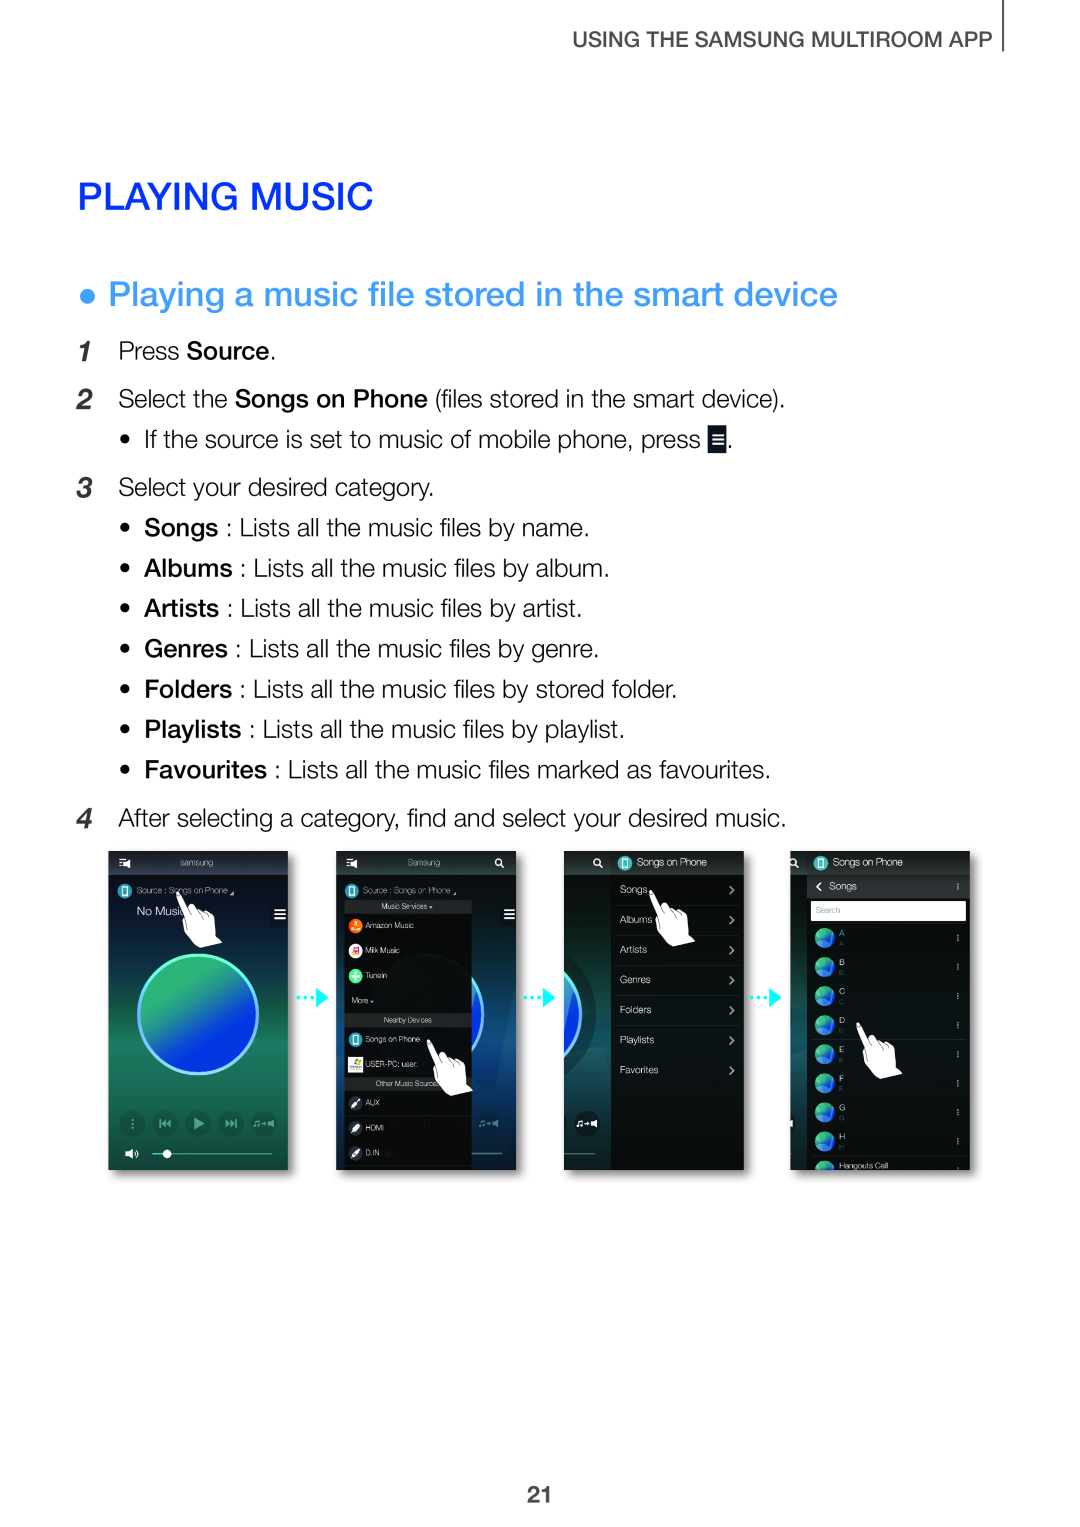 Samsung HW-J6512/XE, HW-J7500/EN, HW-J8501/EN, HW-J6502/EN Playing Music, Playing a music file stored in the smart device 